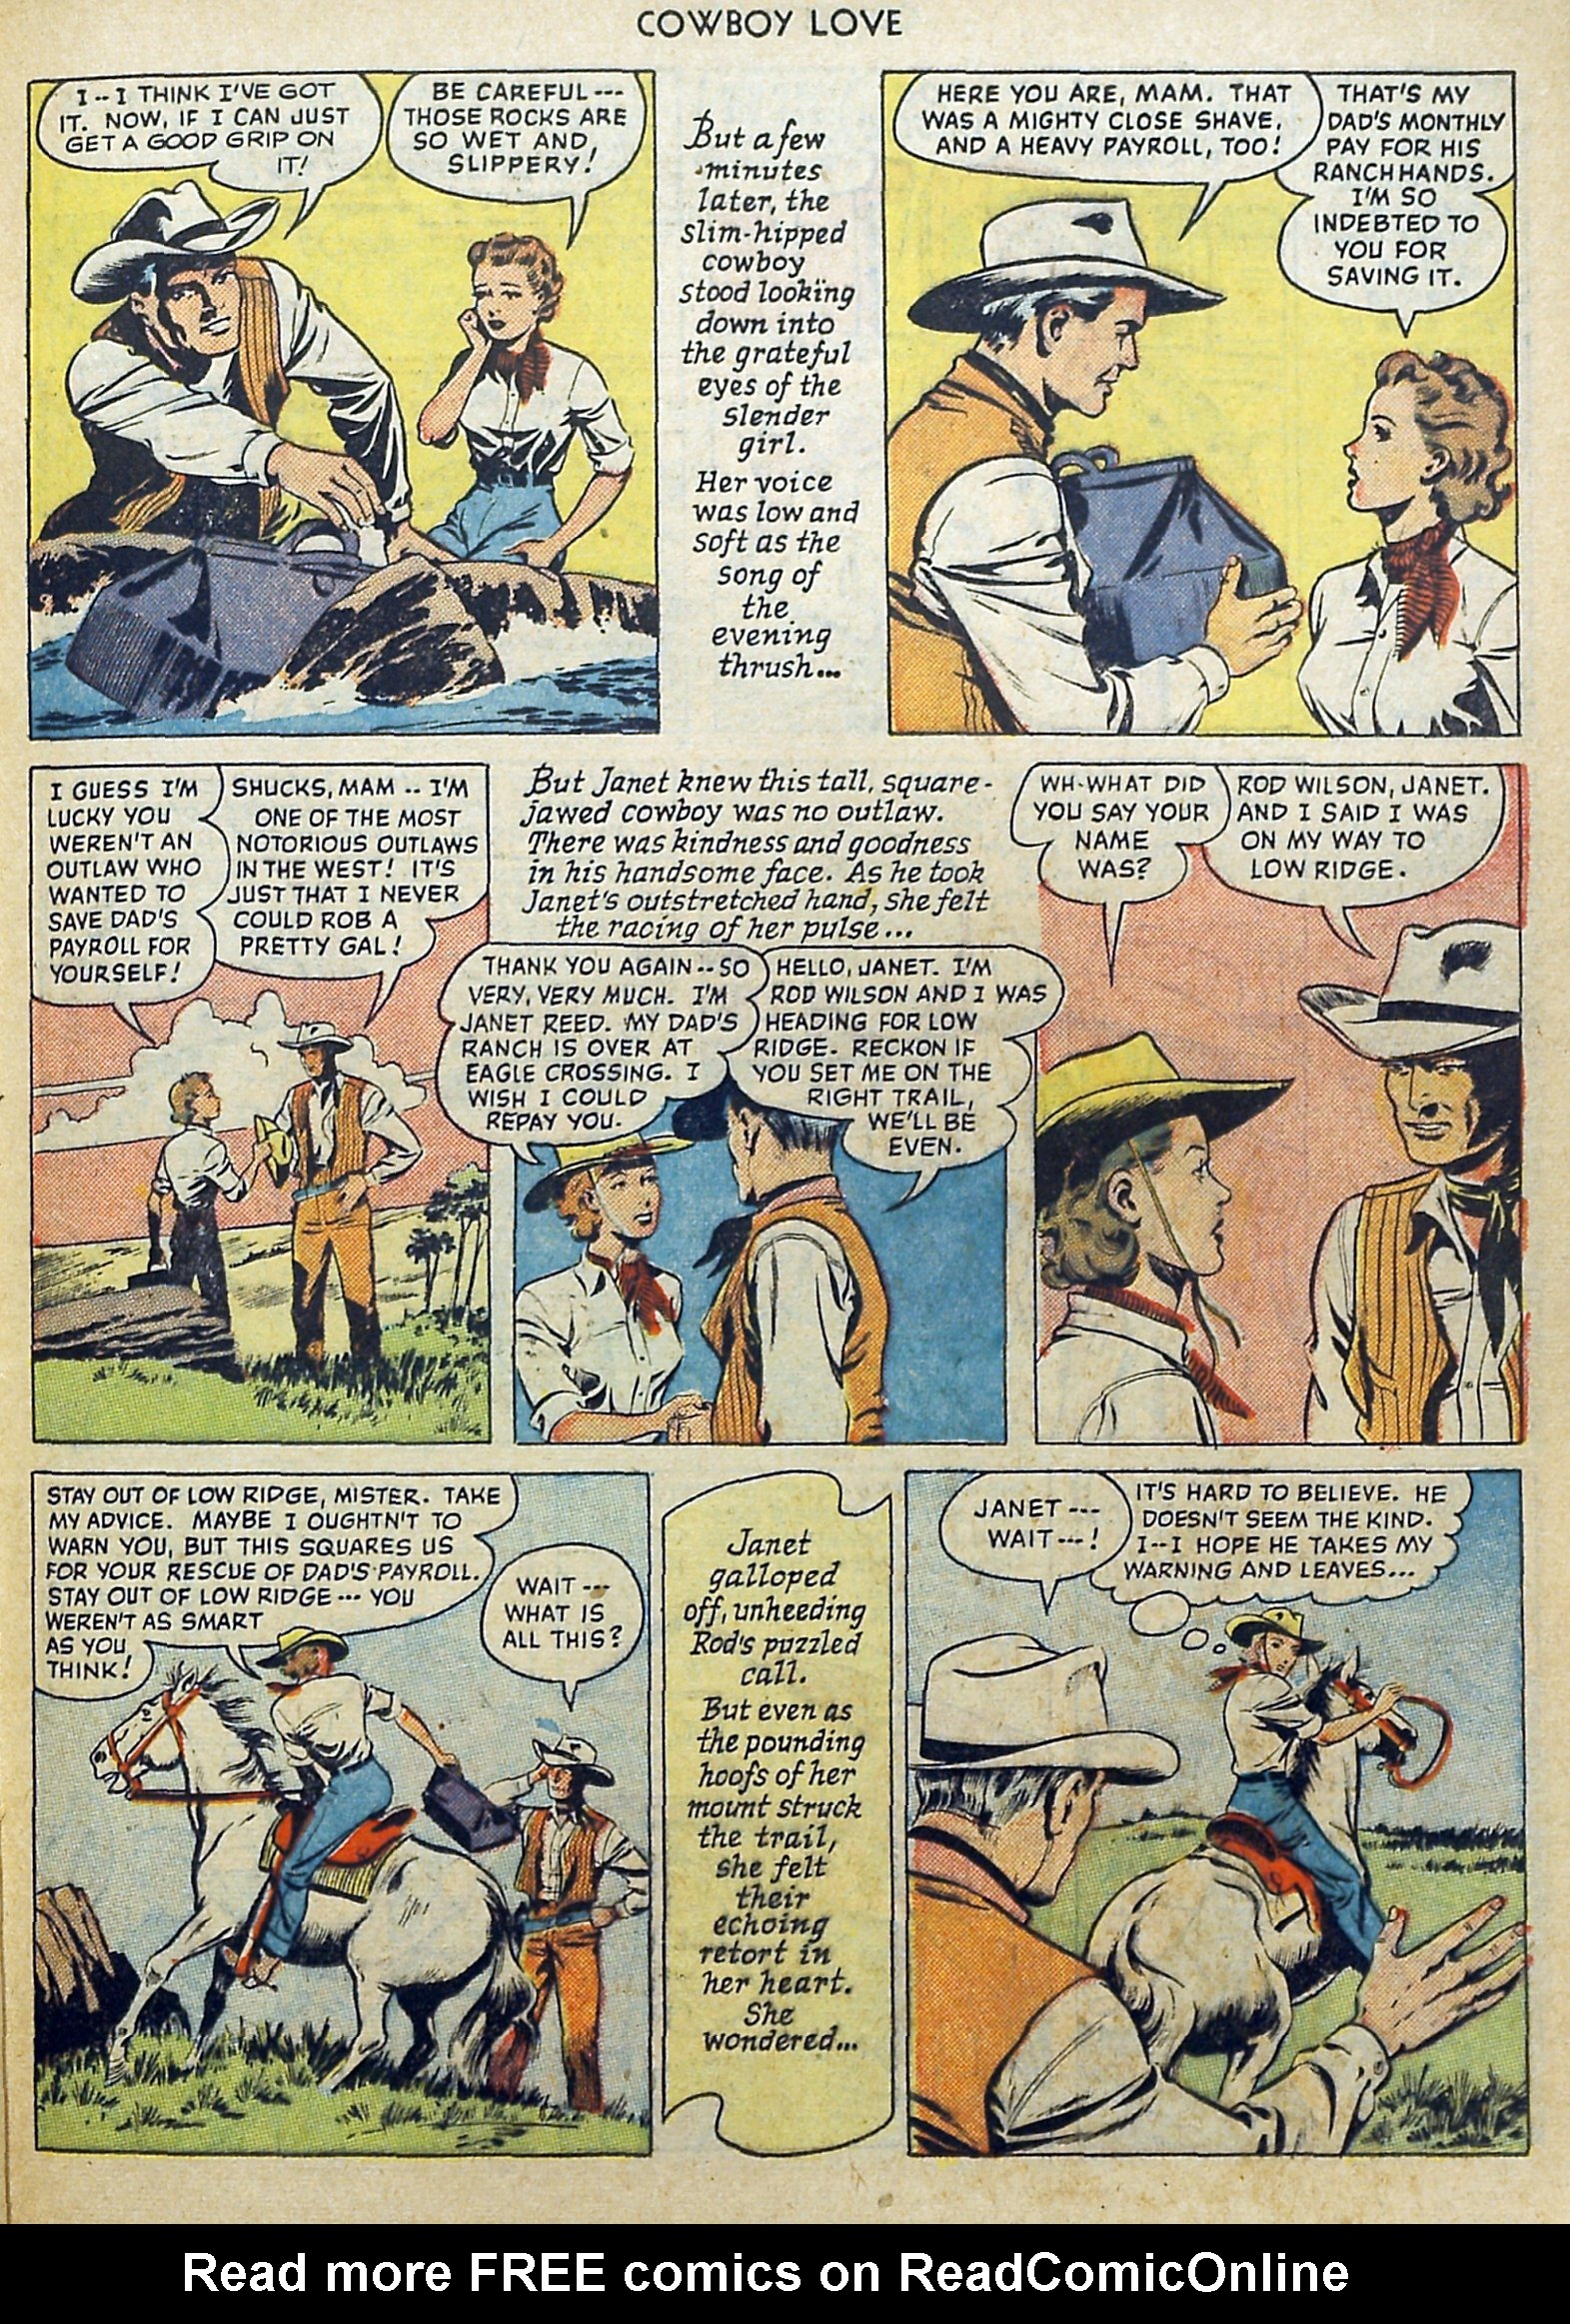 Read online Cowboy Love comic -  Issue #9 - 29